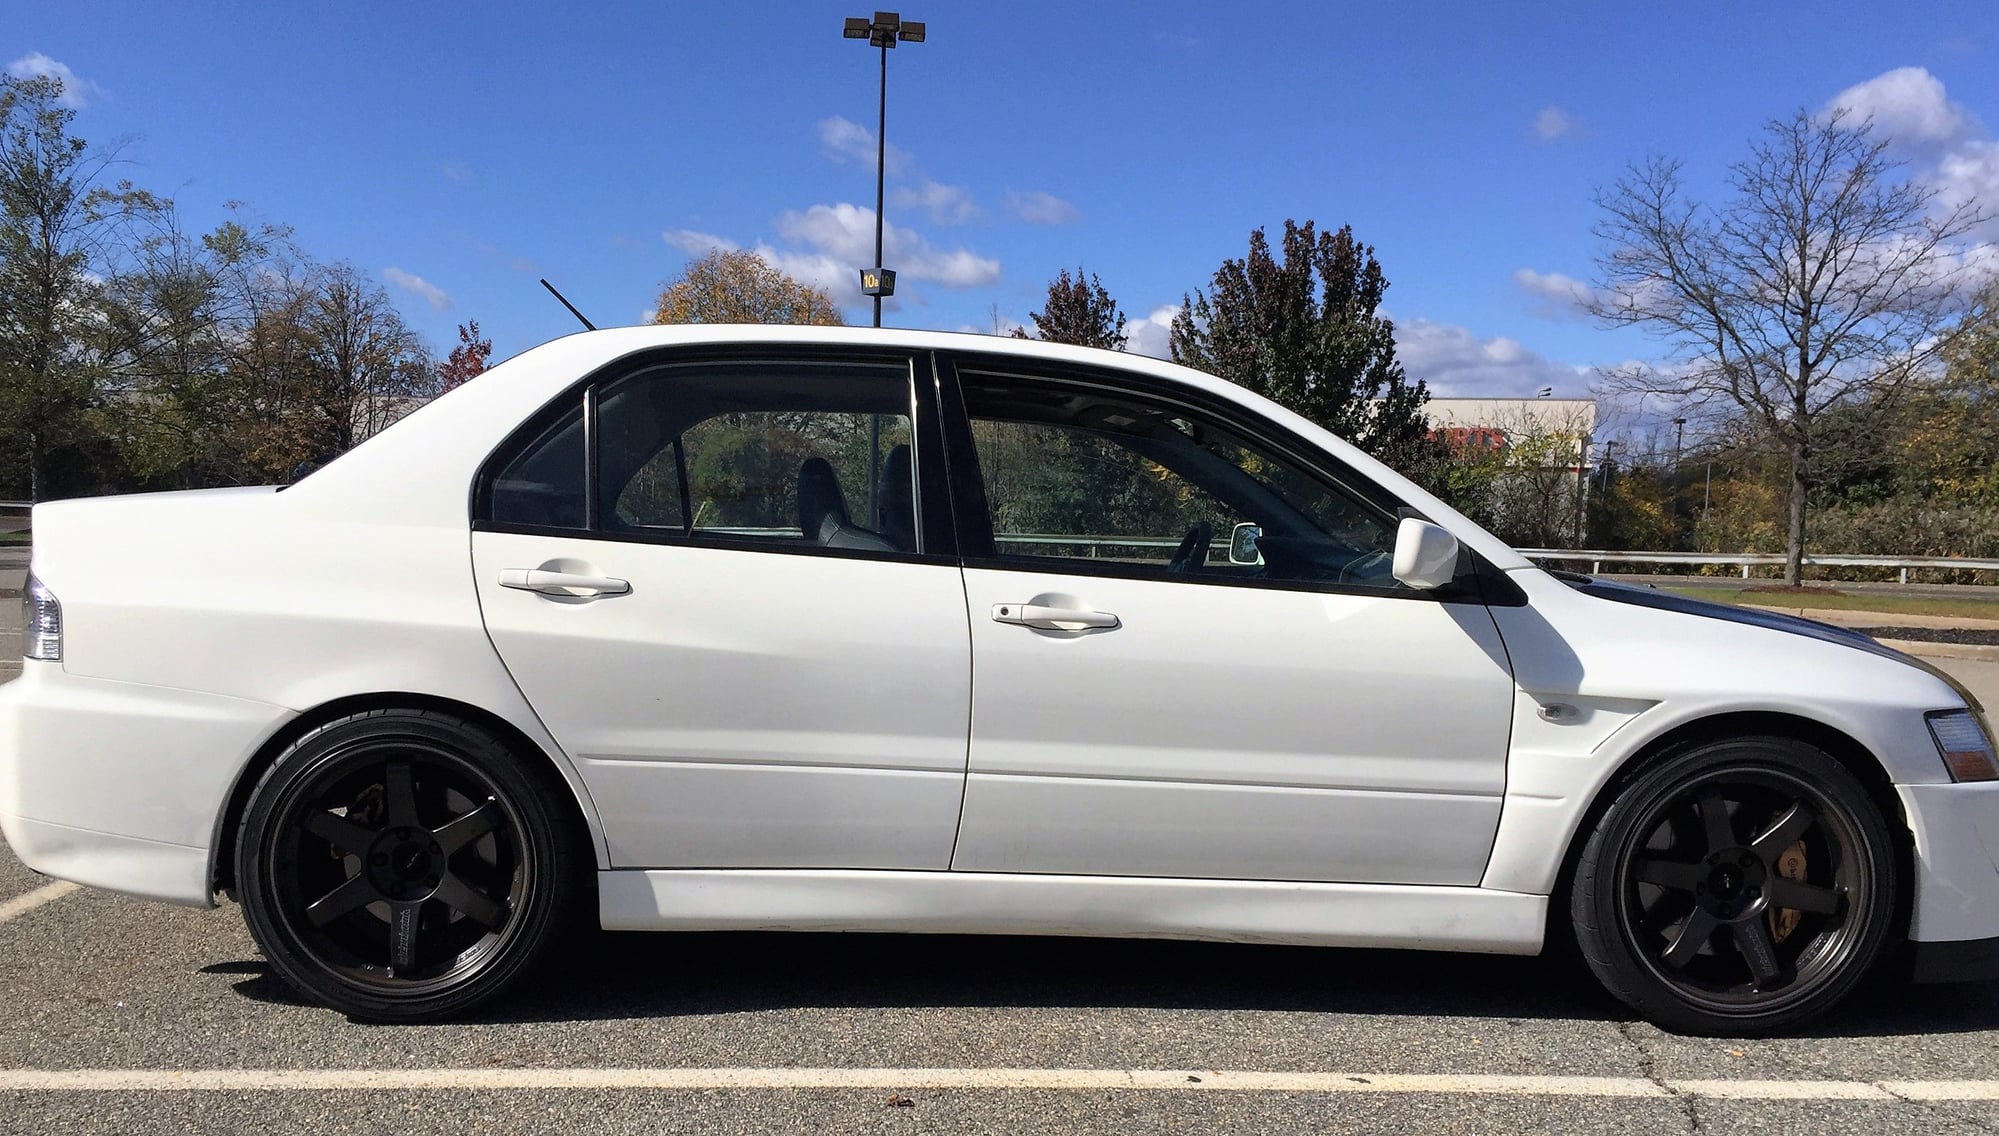 Wheels and Tires/Axles - 18 x 9.5 +22 Volk TE-37 RT's and 255/35/18 ADVAN Neova R tires - Used - 2004 to 2018 Mitsubishi Lancer Evolution - Belleville, NJ 07109, United States